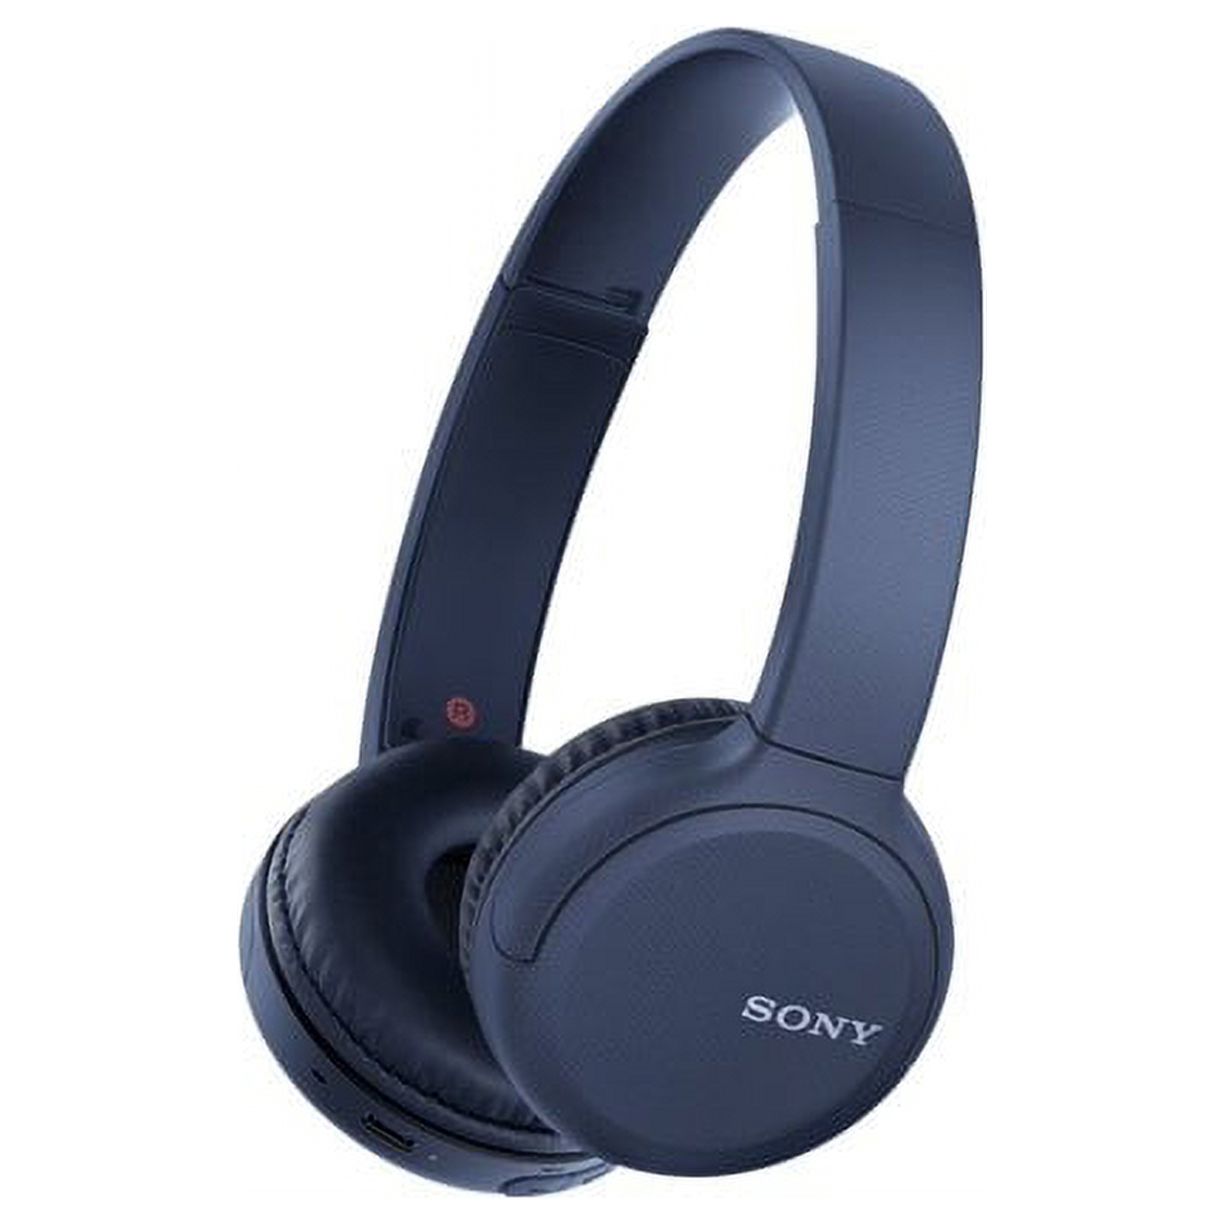 Sony WH-CH510 Wireless Headphones (Blue) - image 1 of 2